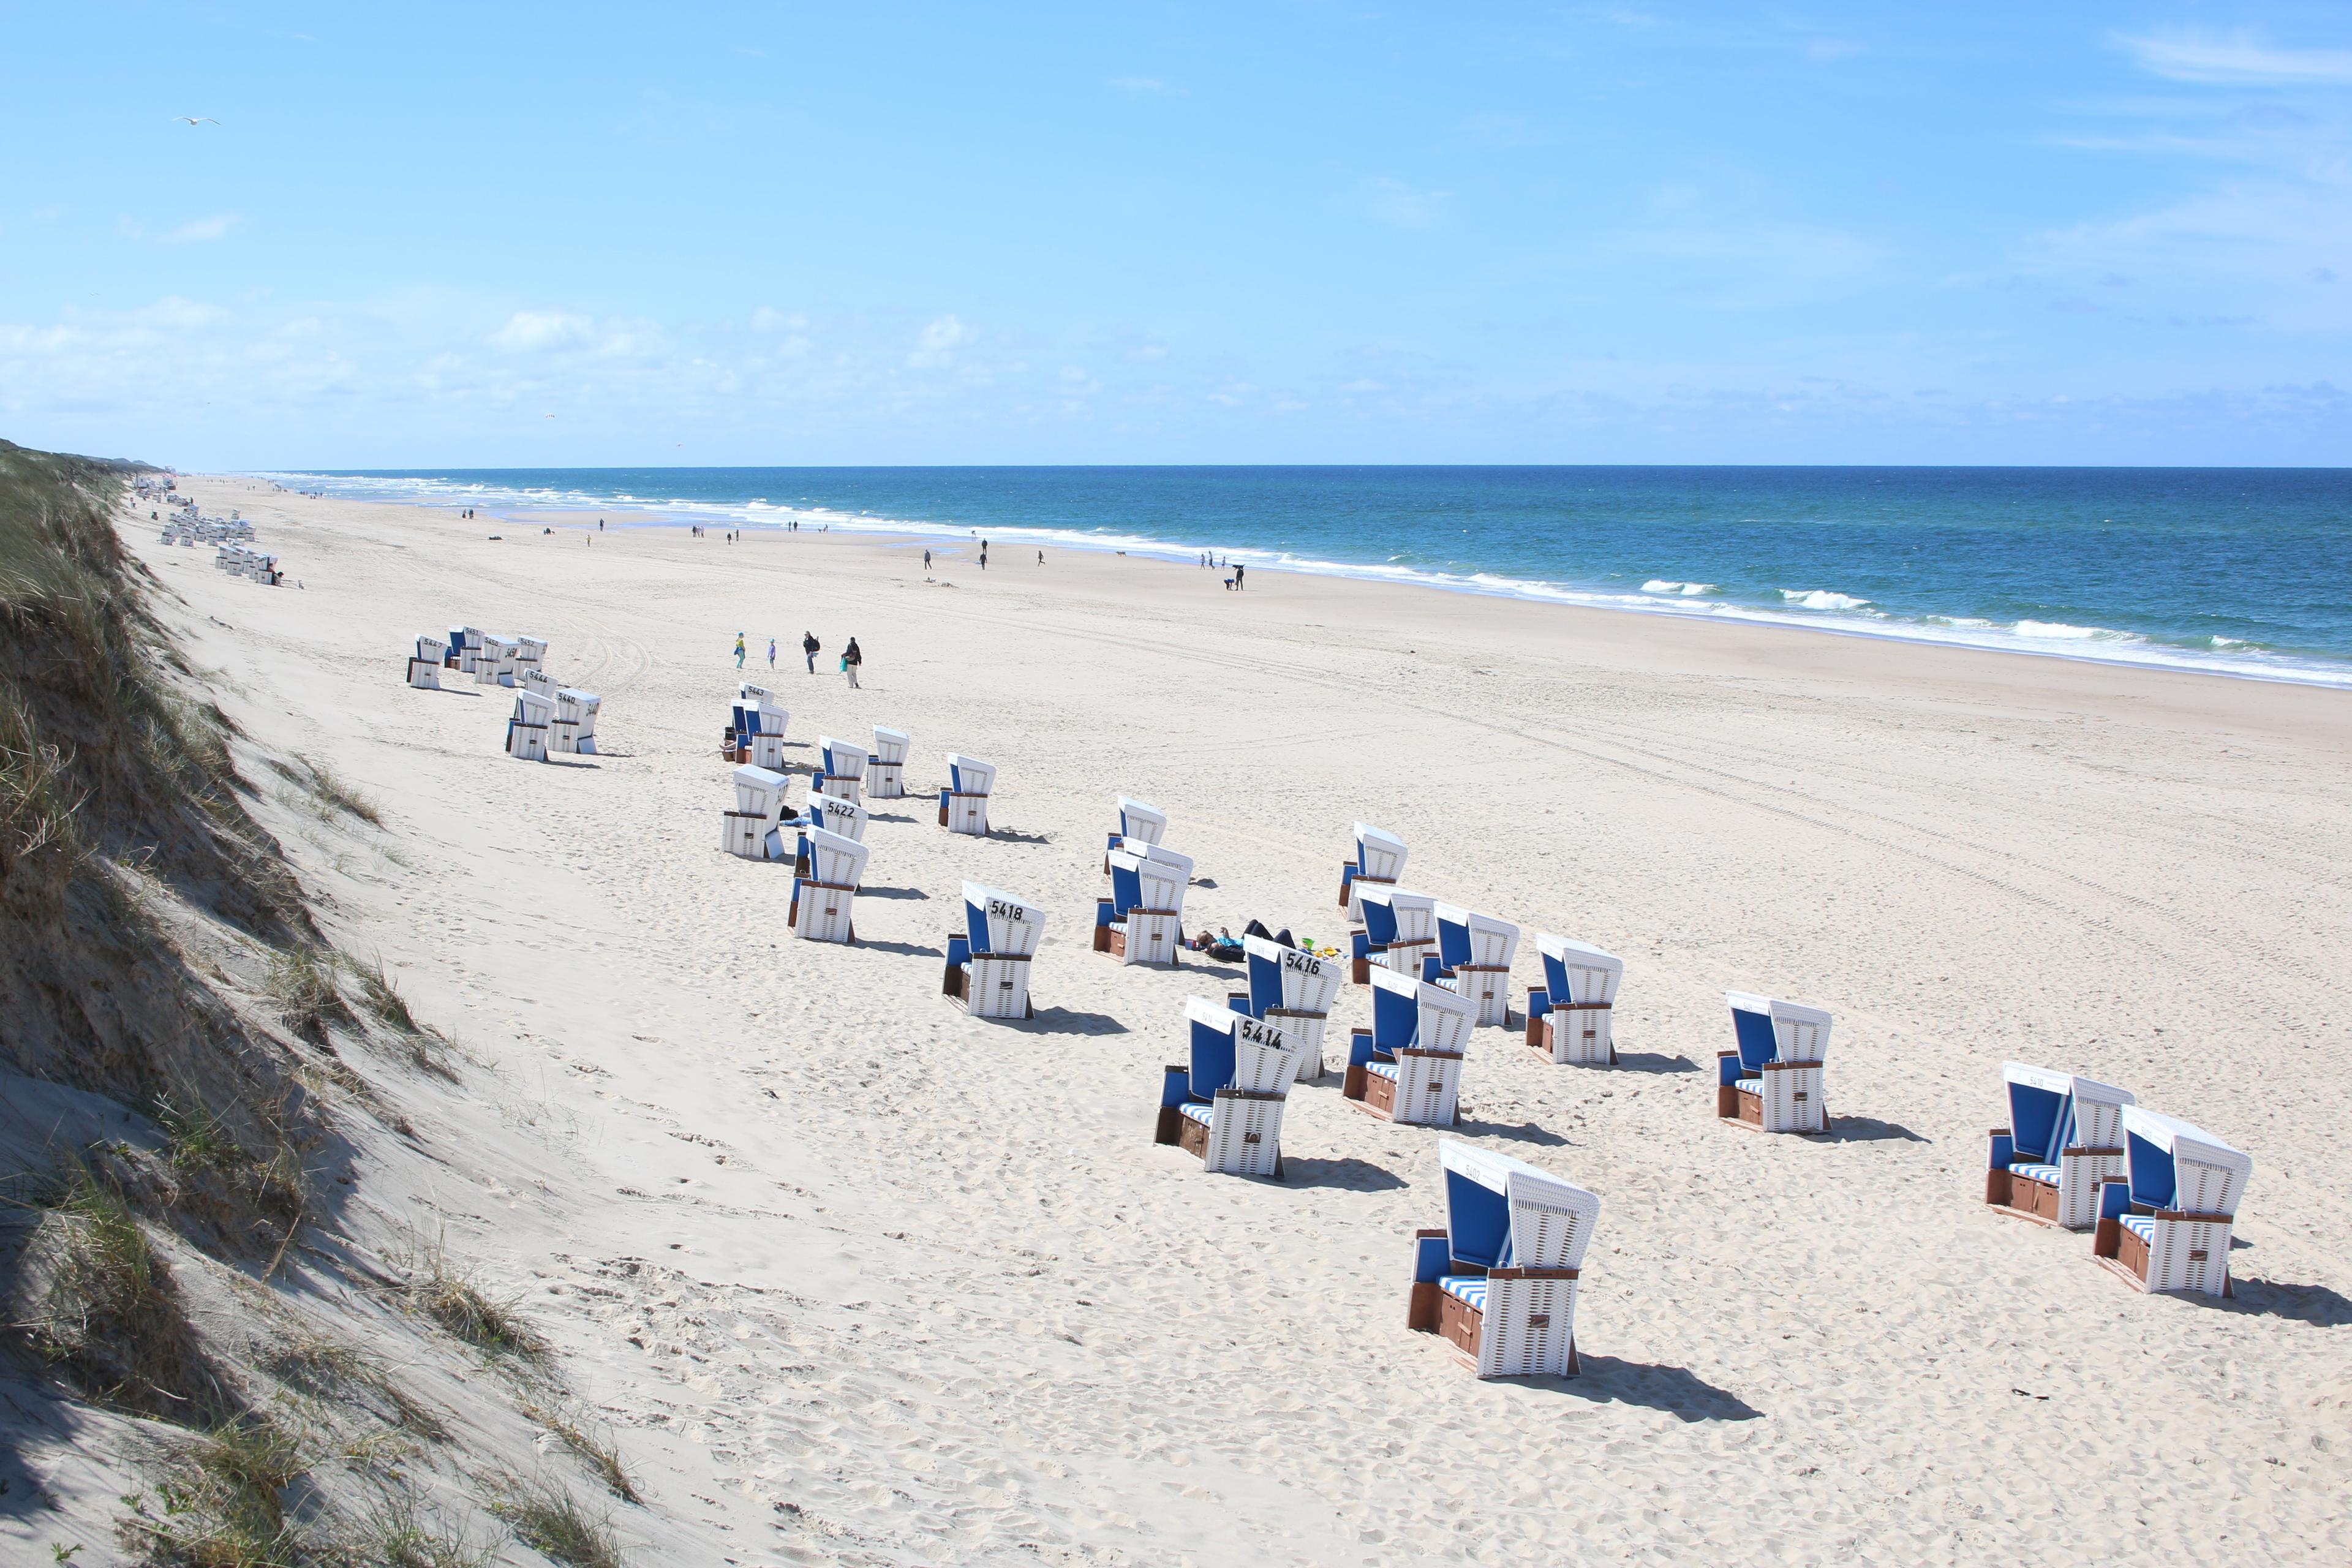 The view of the beach in Rantum on the island of Sylt.